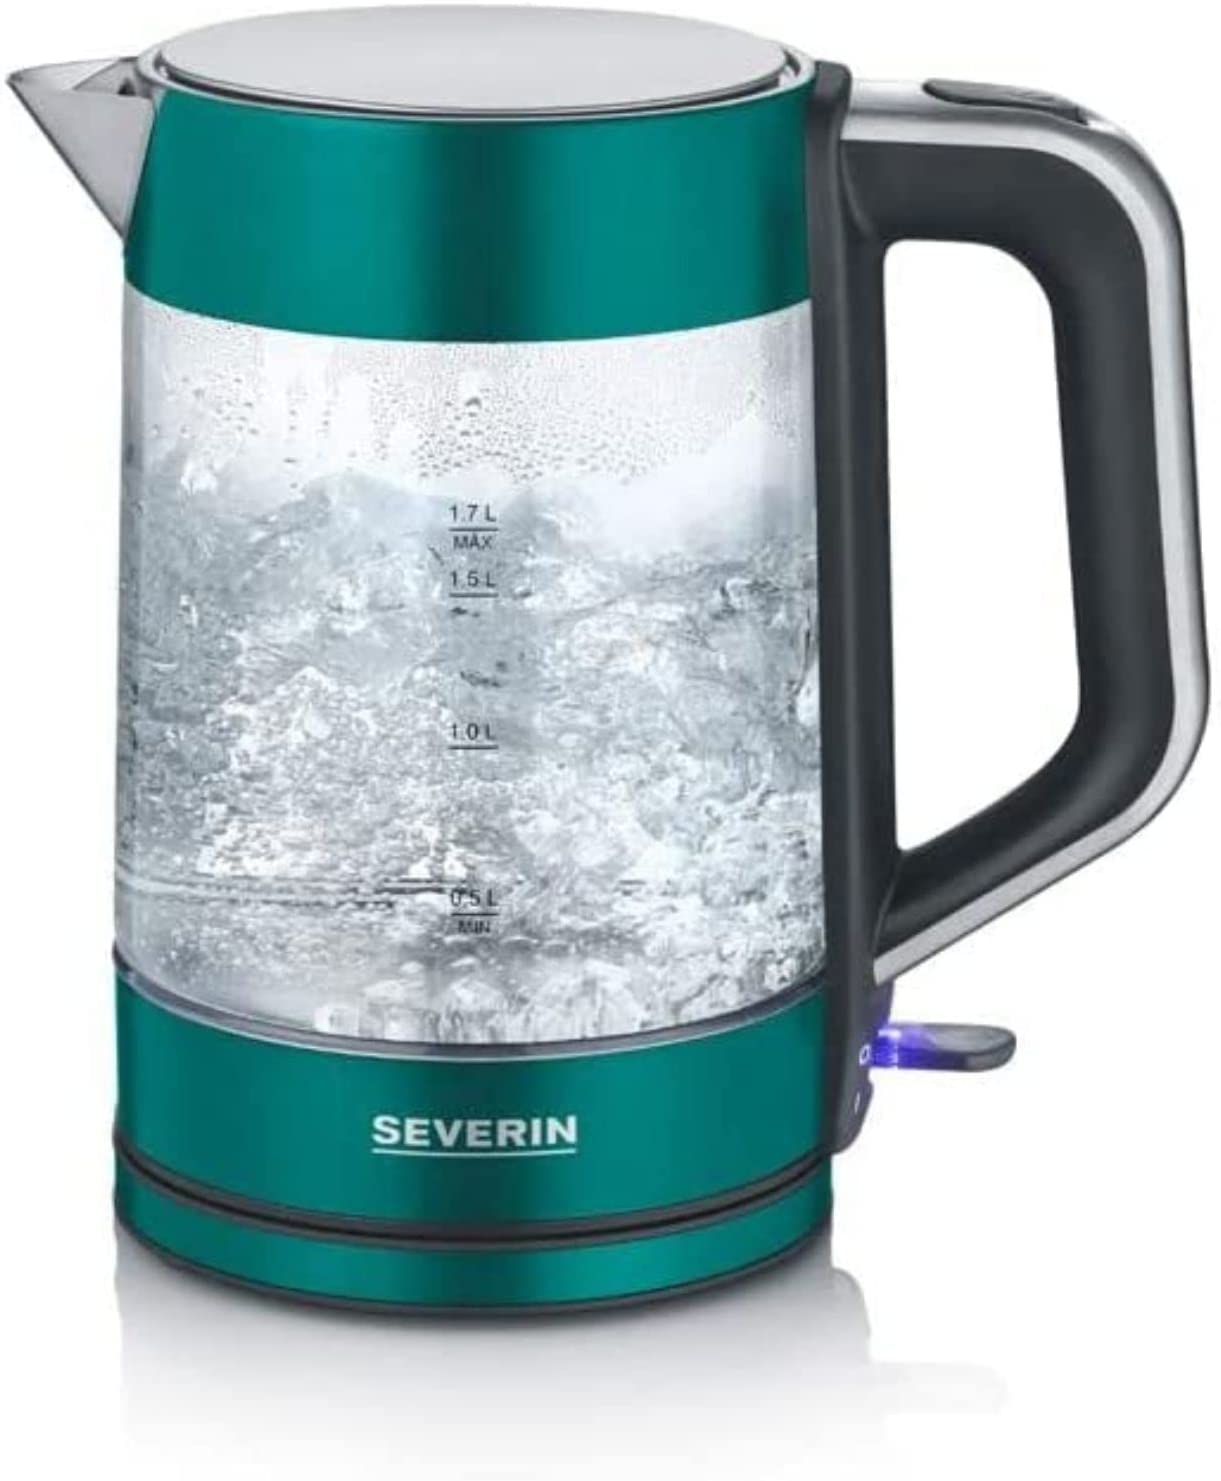 SEVERIN Glass Kettle / Limited Green Edition WK 9268